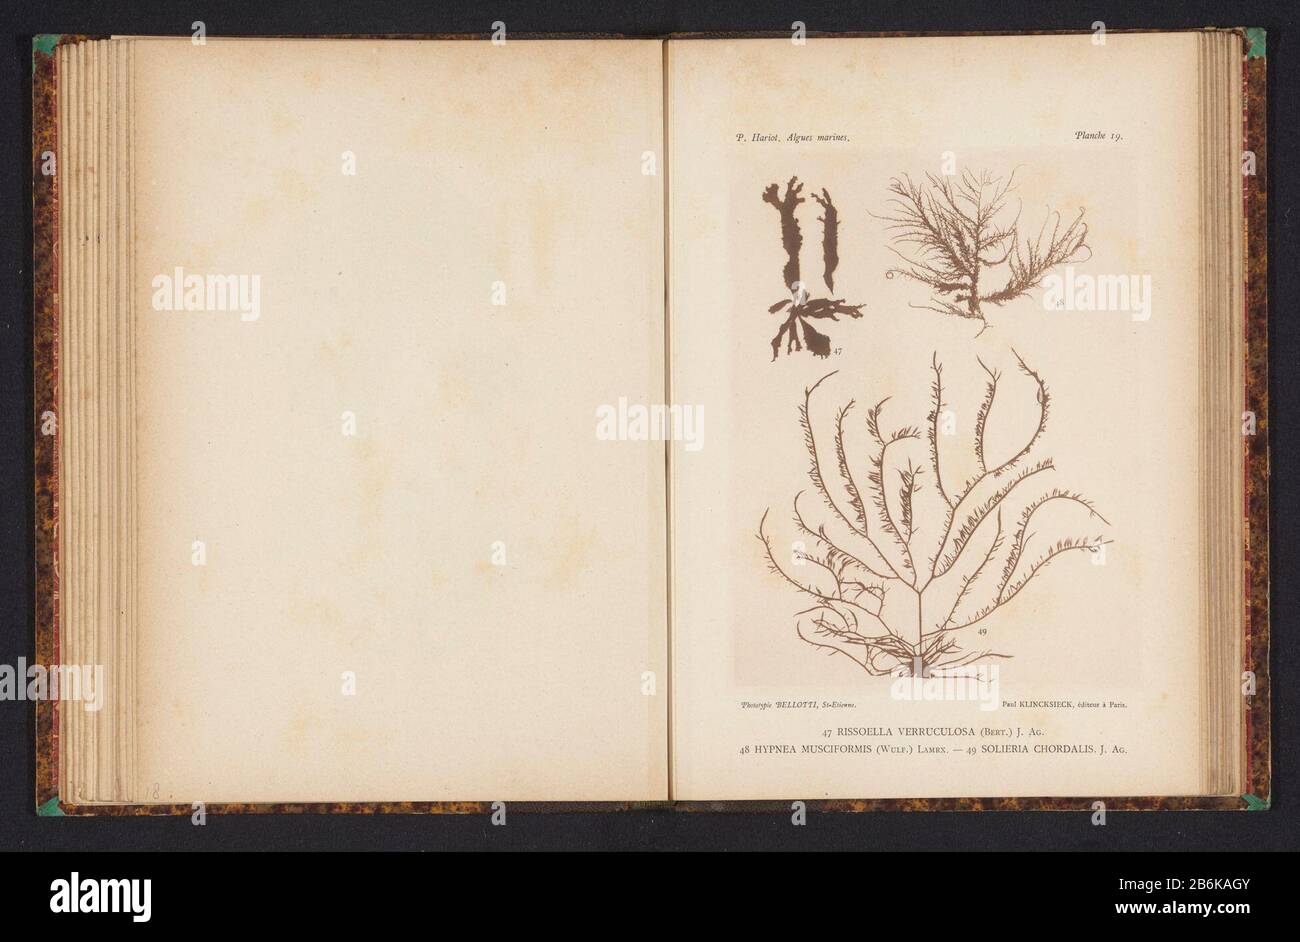 Three kinds of seaweed (47) Rissoella verruculosa, (48) Hypena musciformis, (49) solieria chordalis. Manufacturer : Photographer: anoniemclichémaker: Bellotti (listed building) Publisher: Paul Klincksieck (listed property) Place Manufacture: photographer: Frankrijkclichémaker: Saint-Etienne Publisher: Paris Date: ca. 1882 - or for 1892 Material: paper Technique: light pressure measurements: imprinted: h 161 mm × W 119 mm Subject: algae, seaweed Stock Photo